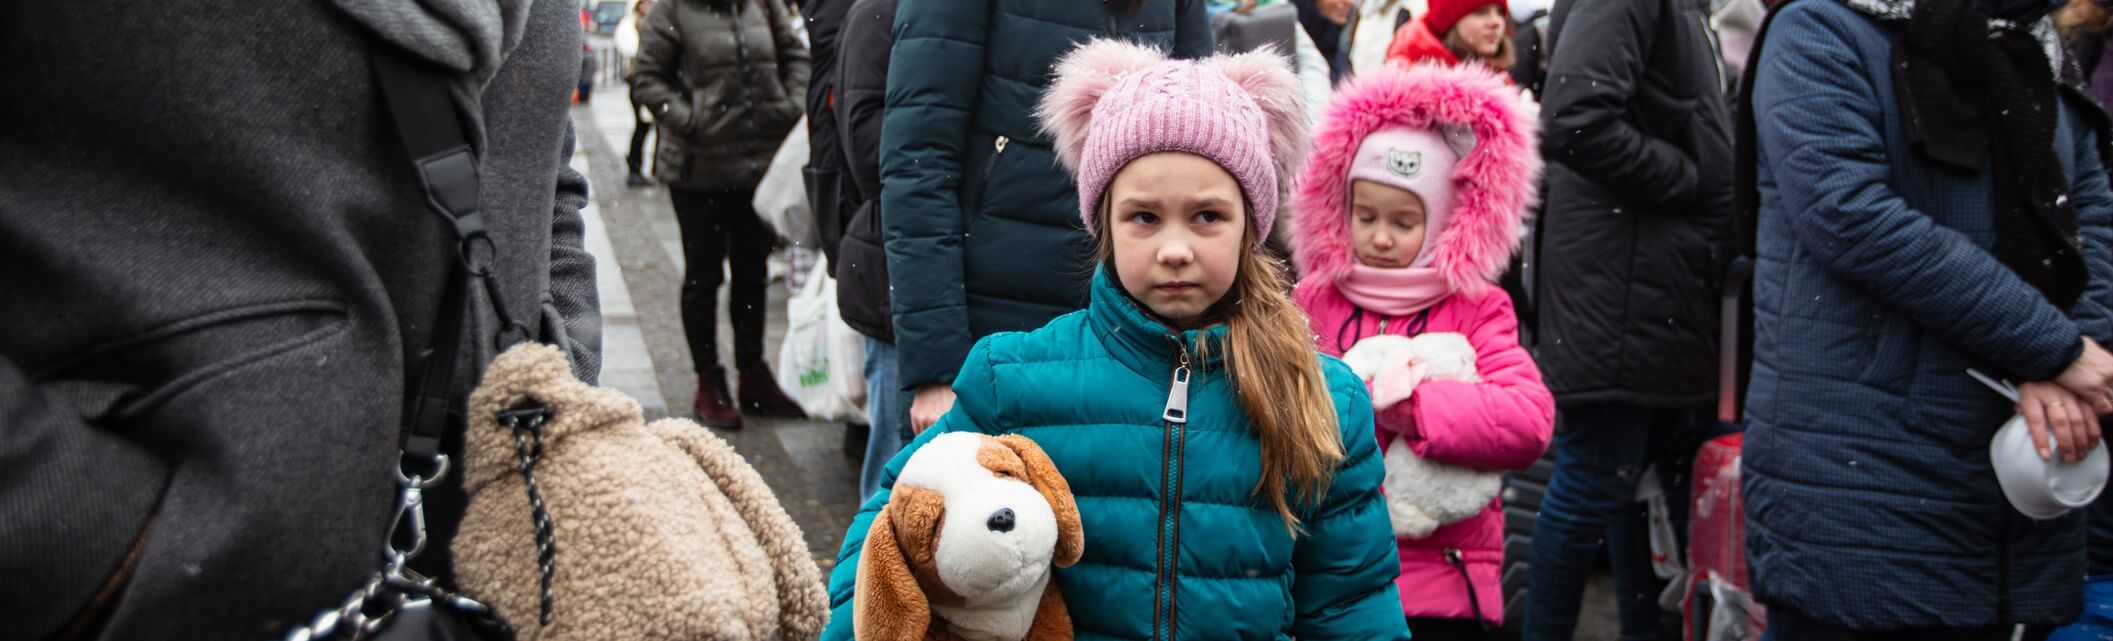 Ukrainian refugees at Lviv train station are waiting for a train to escape to Europe